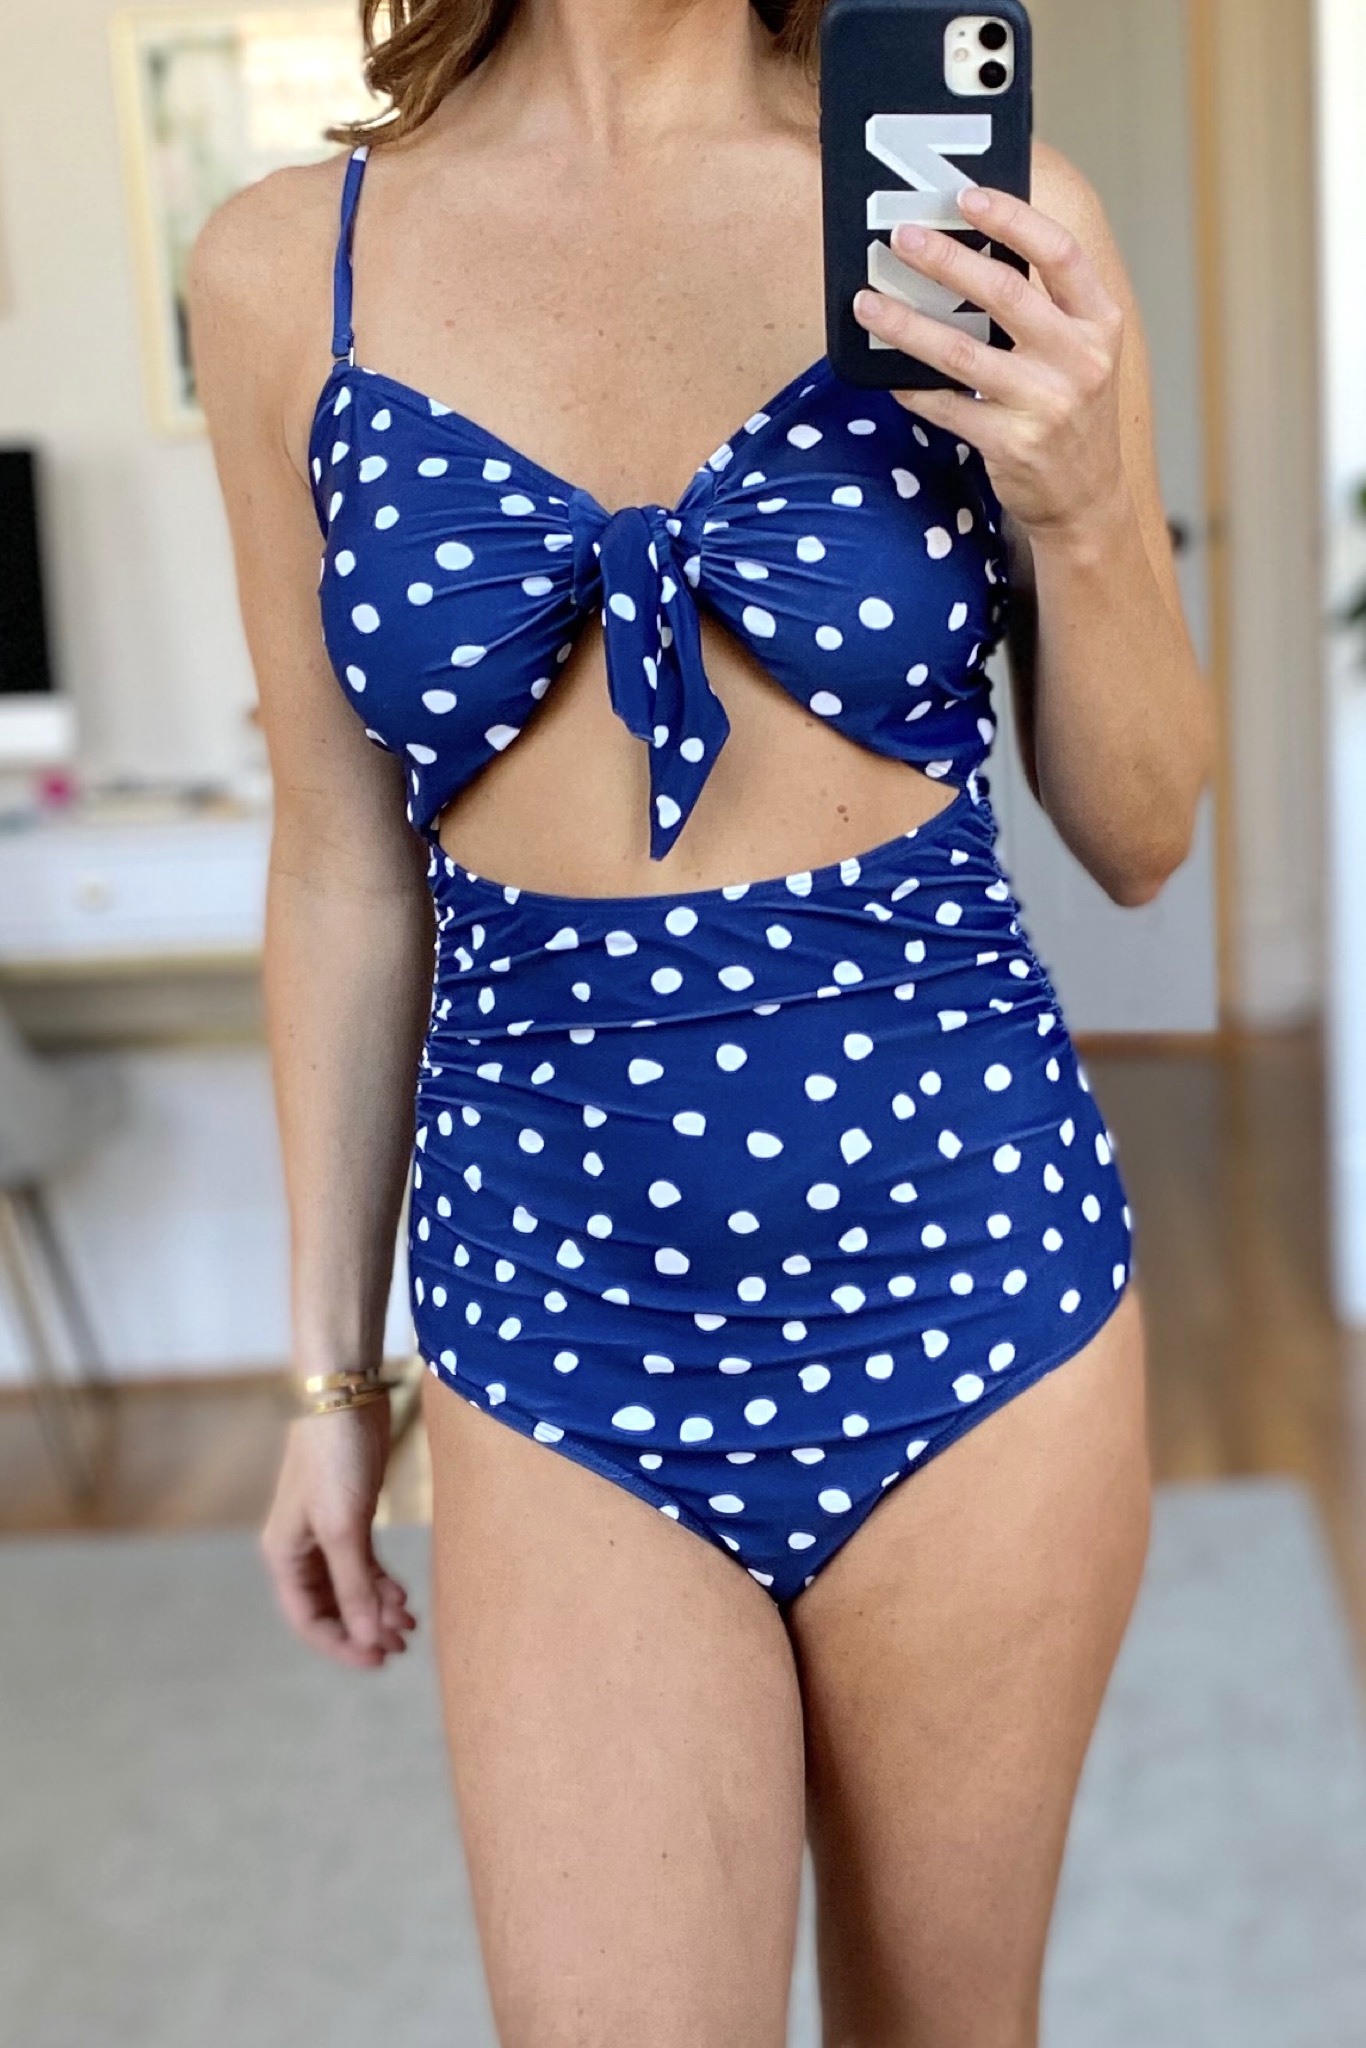 Amazon swimsuits, one piece swimsuits, finding beauty mom, swimsuits over 40 style 